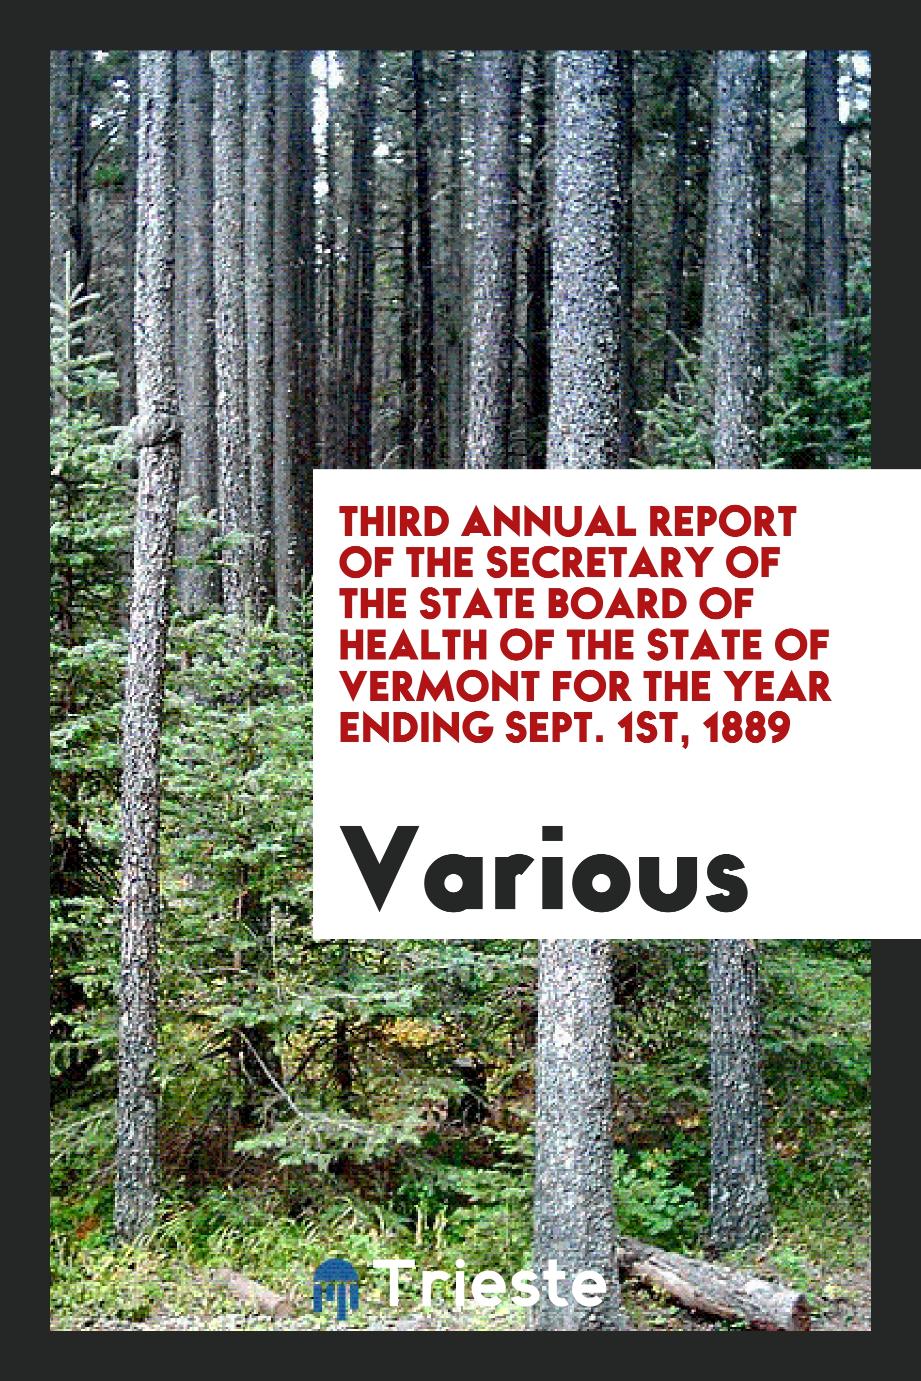 Third annual report of the secretary of the state board of health of the state of vermont for the year ending sept. 1st, 1889